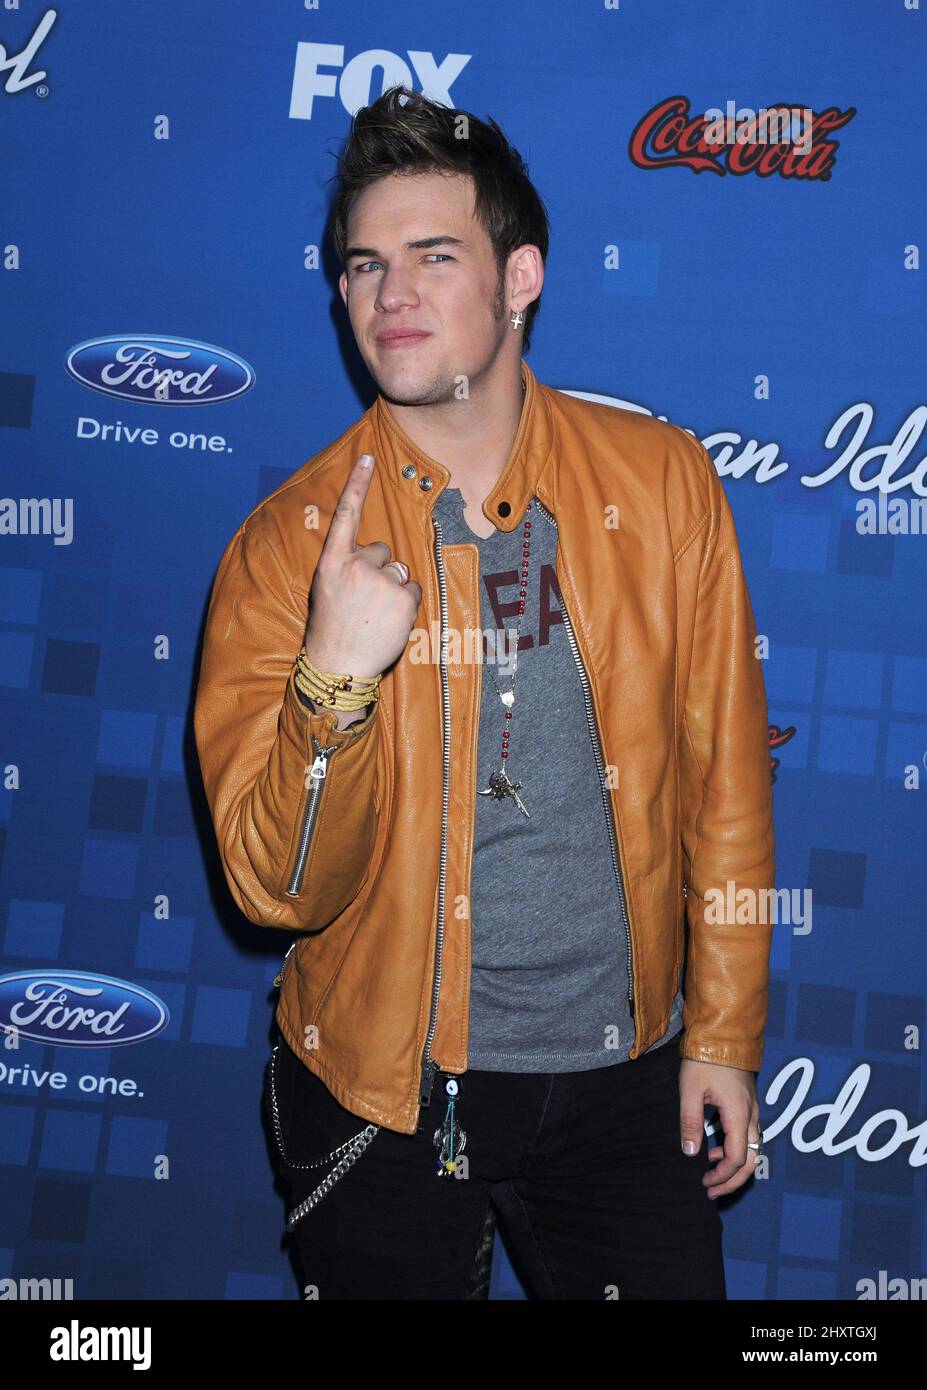 James Durbin at the American Idol Season 10 Top 13 Finalists Party held on the rooftop at The Grove in Los Angeles, CA. Stock Photo